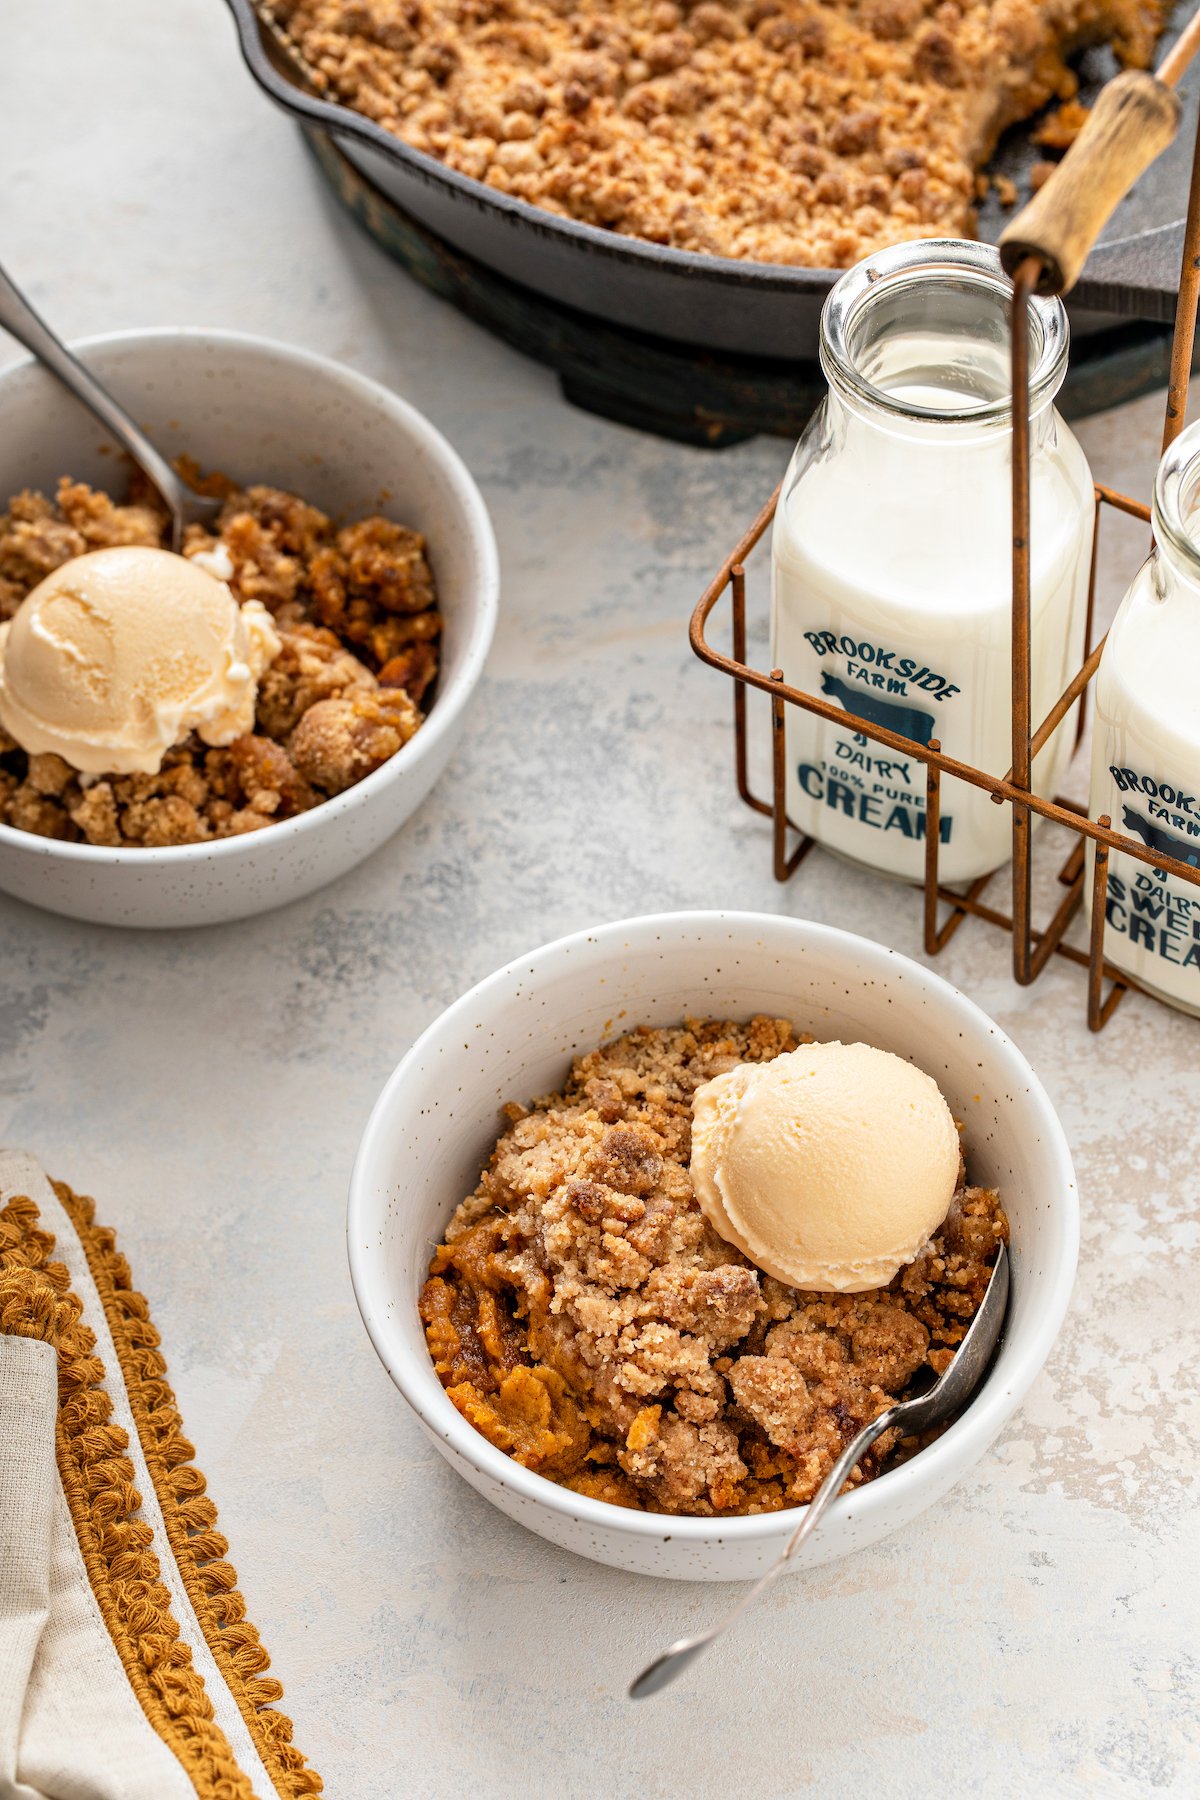 A sweet potato pie crumble in two bowls and a cast iron skillet with ice cream on top of each serving.